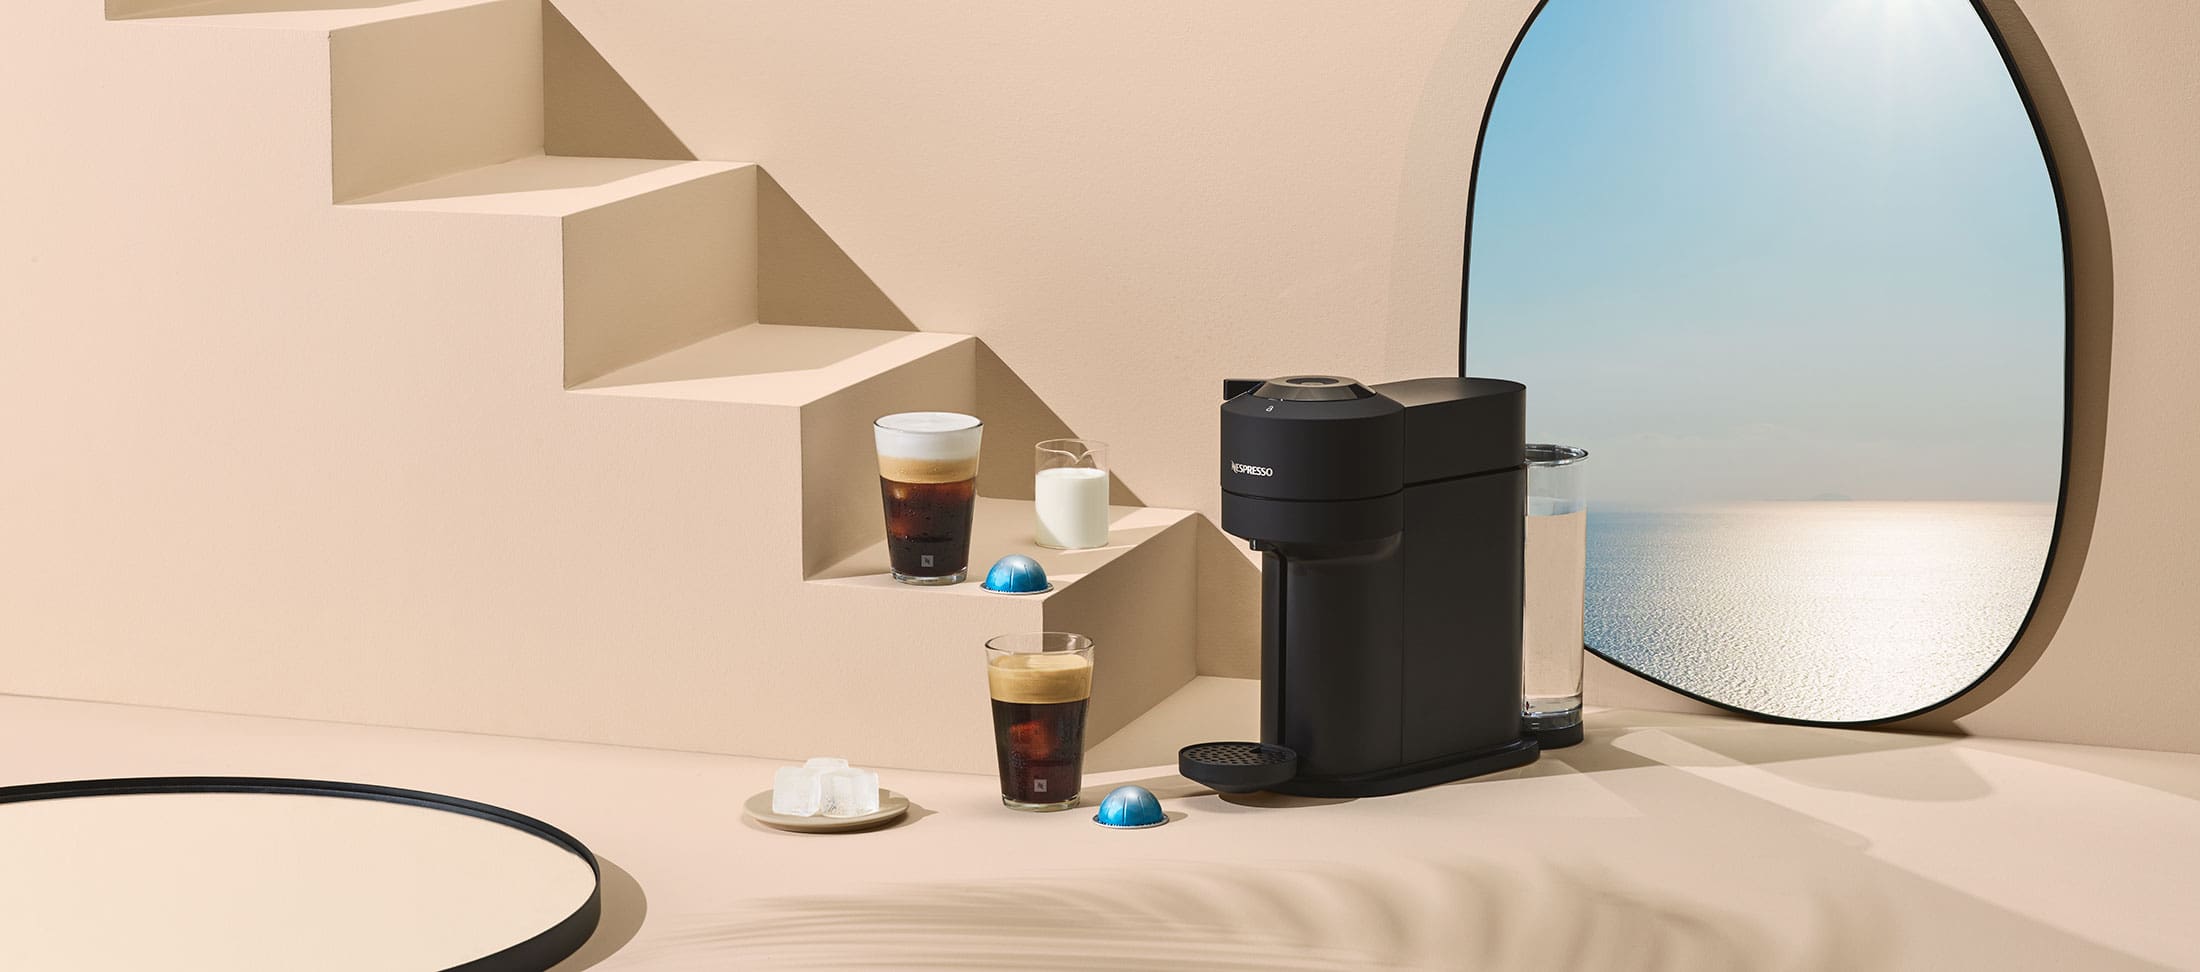 Nespresso creates the ultimate pairing of coffee and ice